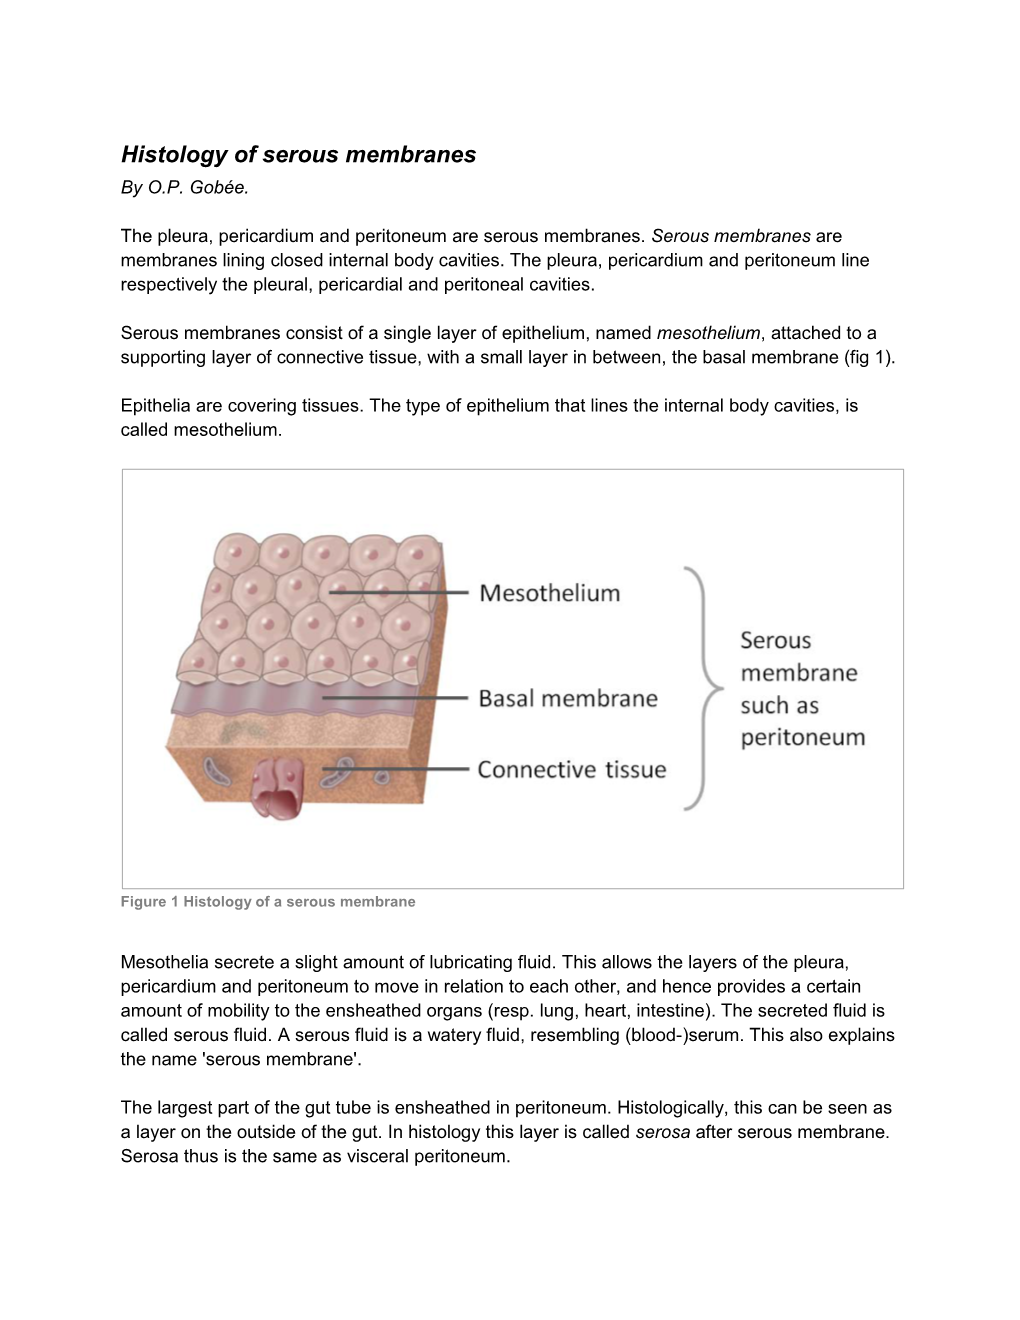 Histology of Serous Membranes by O.P